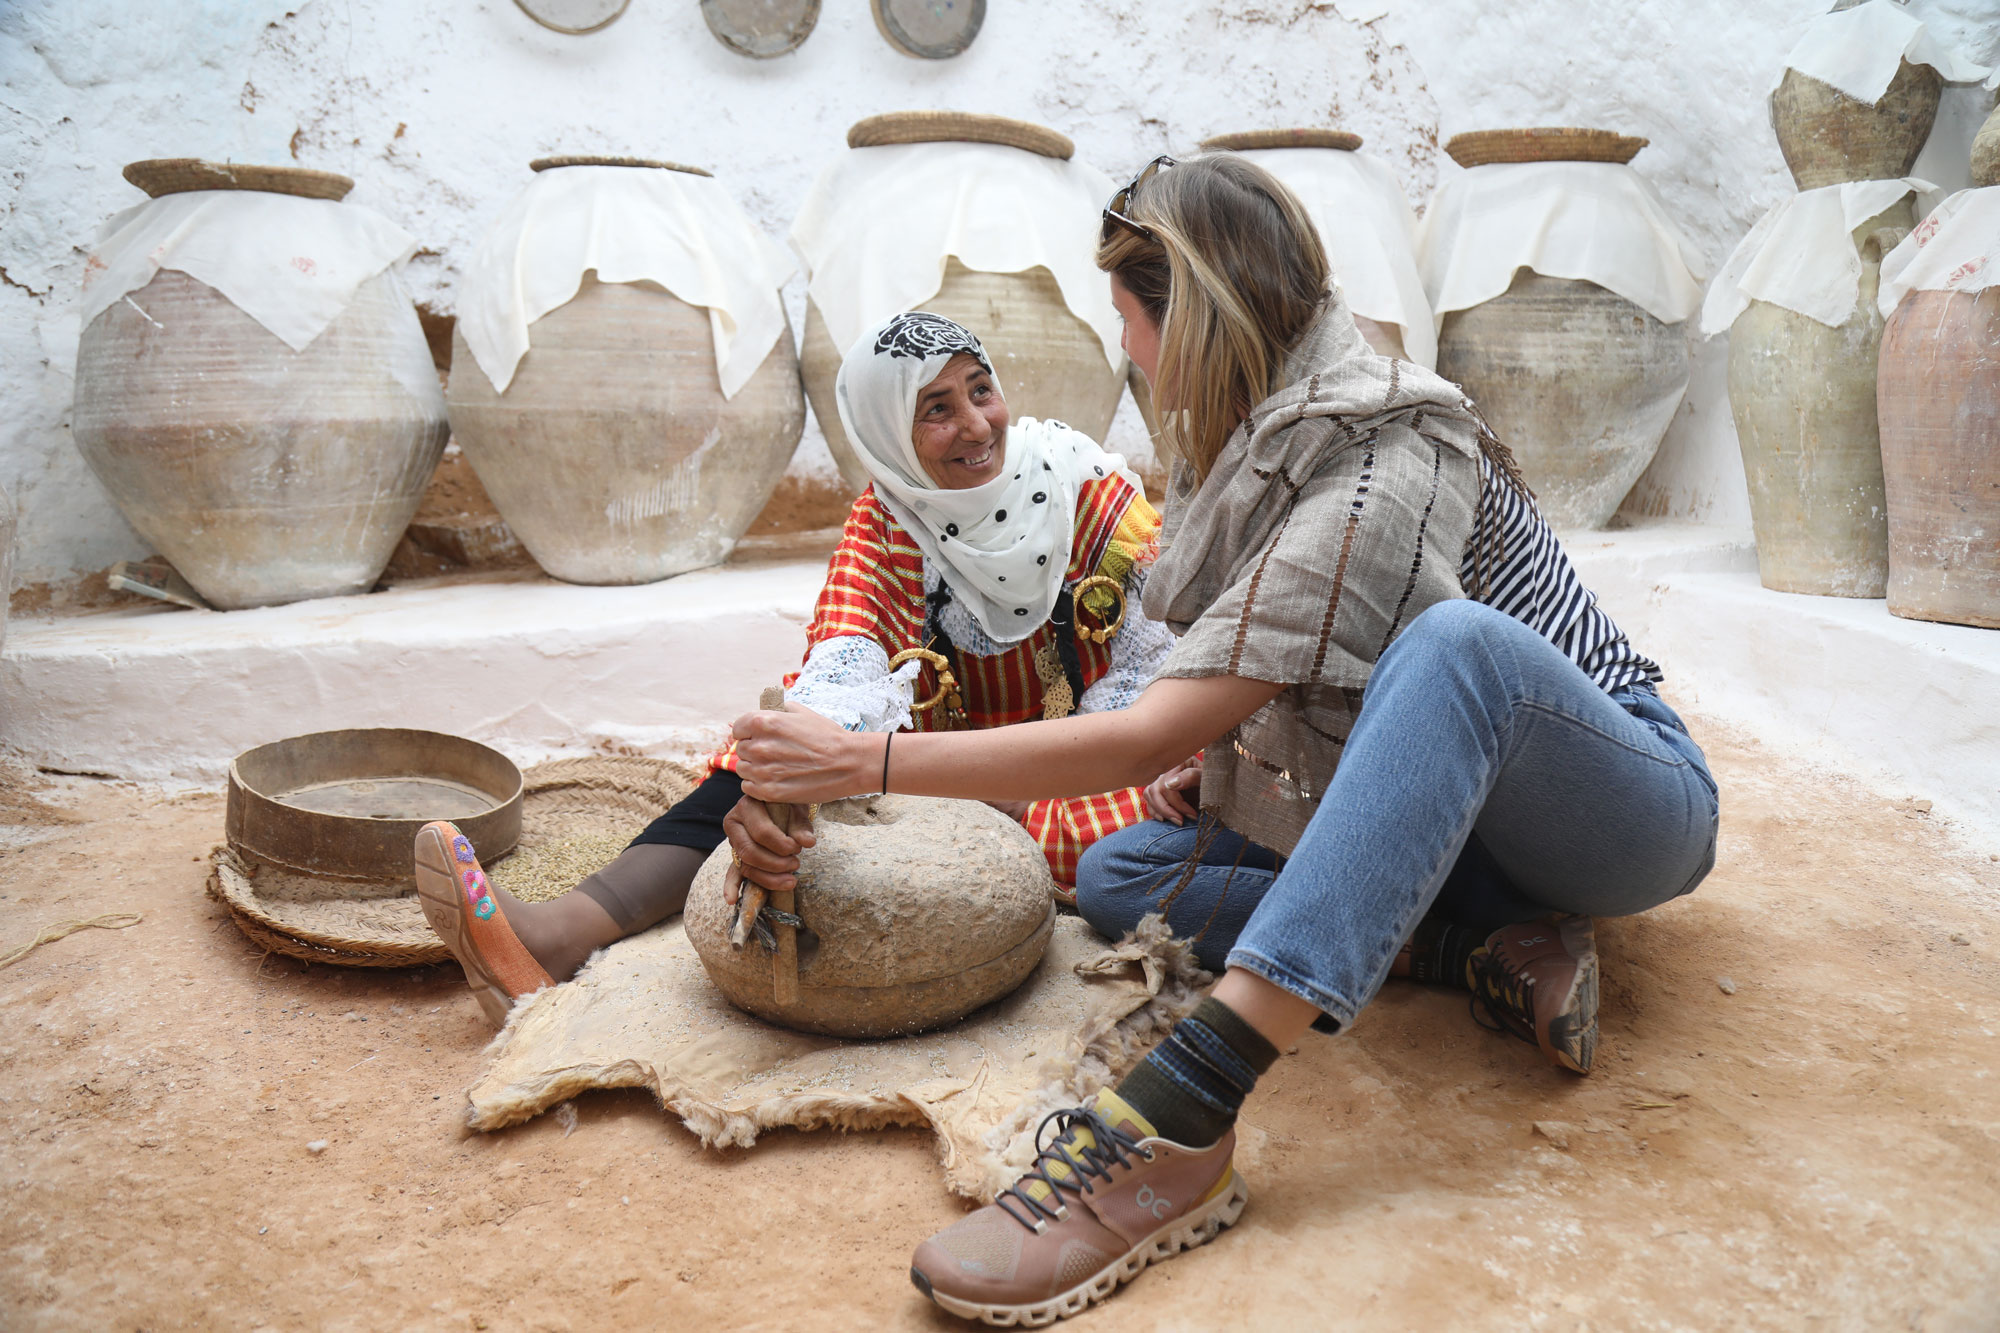 Two women sit on the ground outdoors. On the right, one wears a white head scarf and smiles at a blonde women to her left. Together, they hold a large, round clay mill used to grind couscous. It is placed atop a lambskin rug.